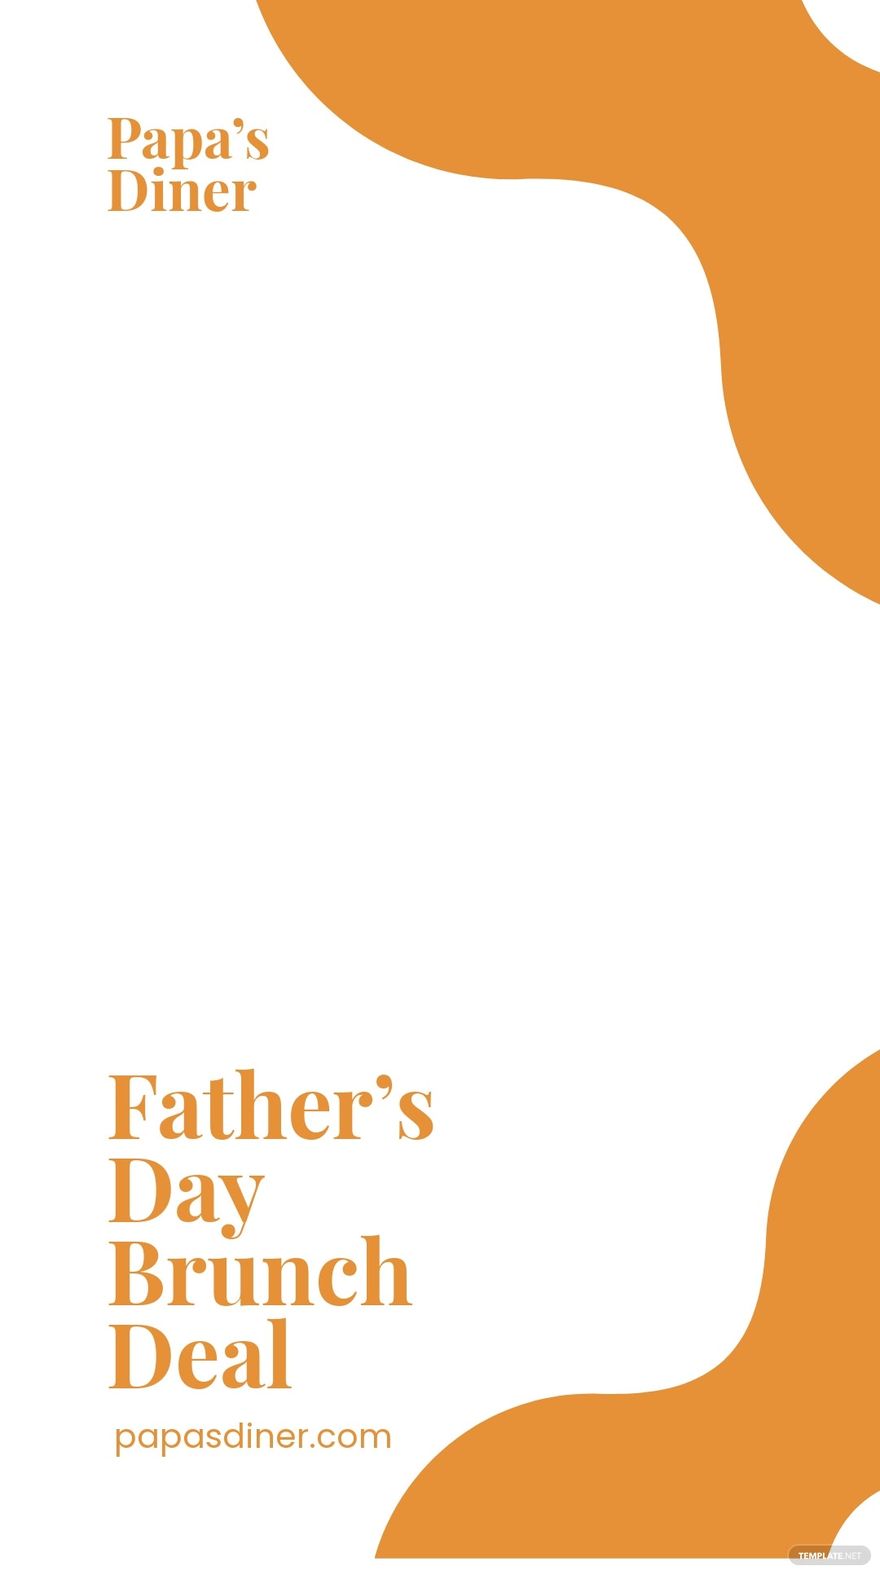 Father's Day Brunch Deal Snapchat Geofilter